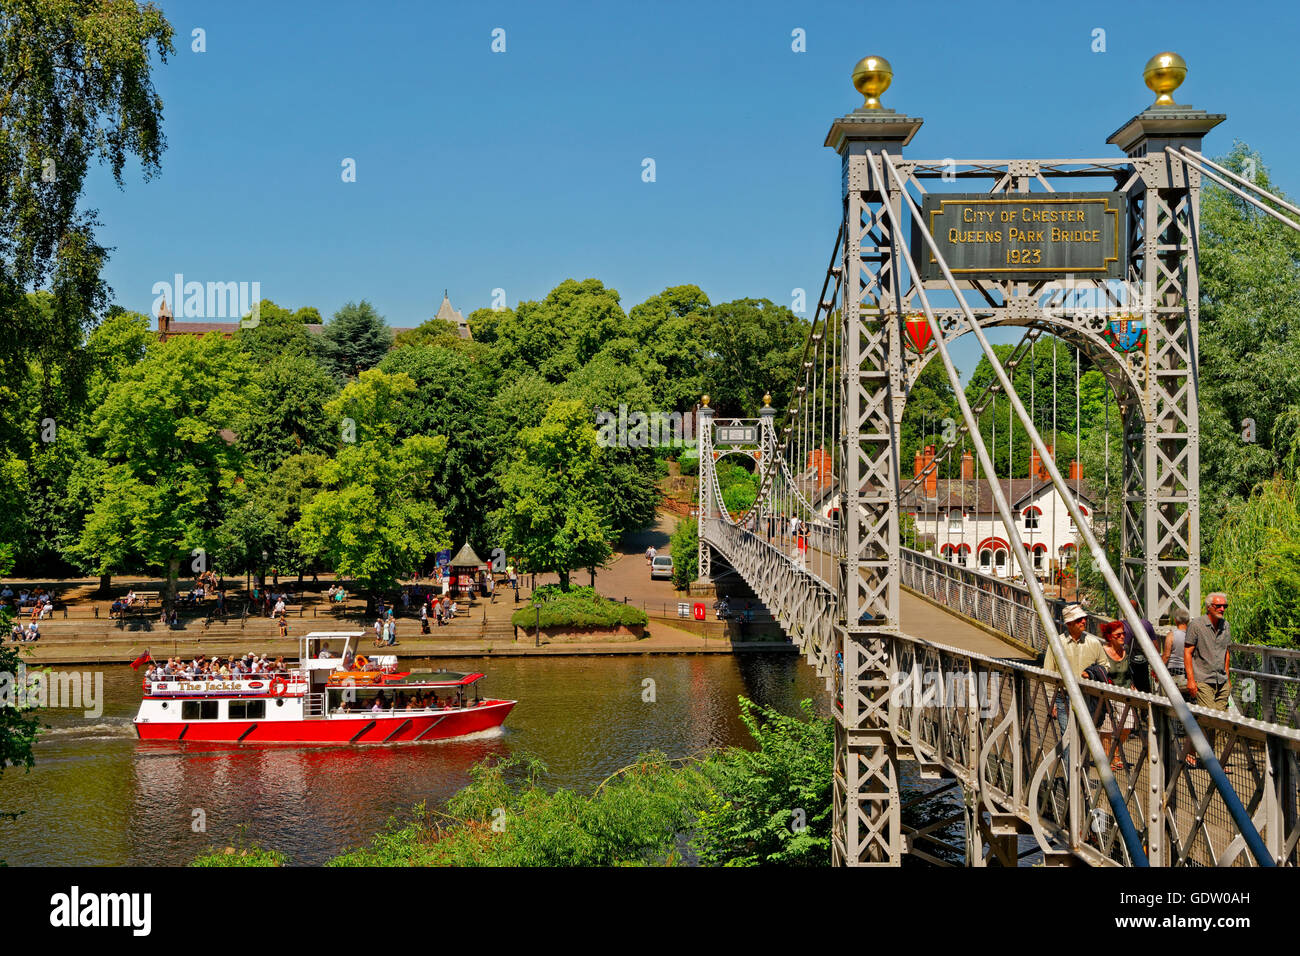 Queen's Park Bridge and River Dee at Chester, county town of Cheshire, England. UK Stock Photo